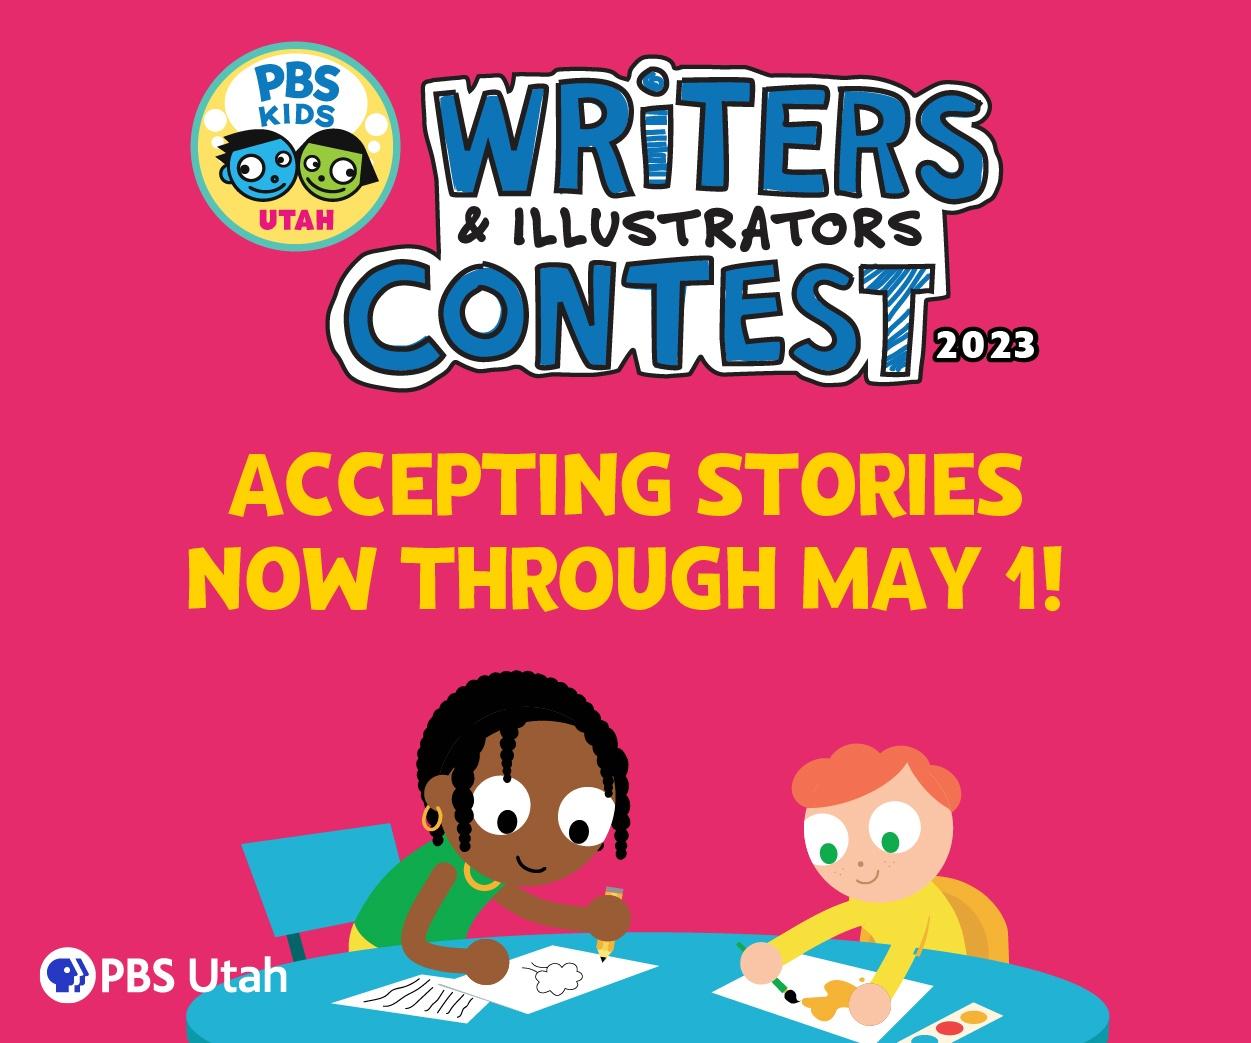 Writers & Illustrators Contest 2023: Accepting stories now through May 1!